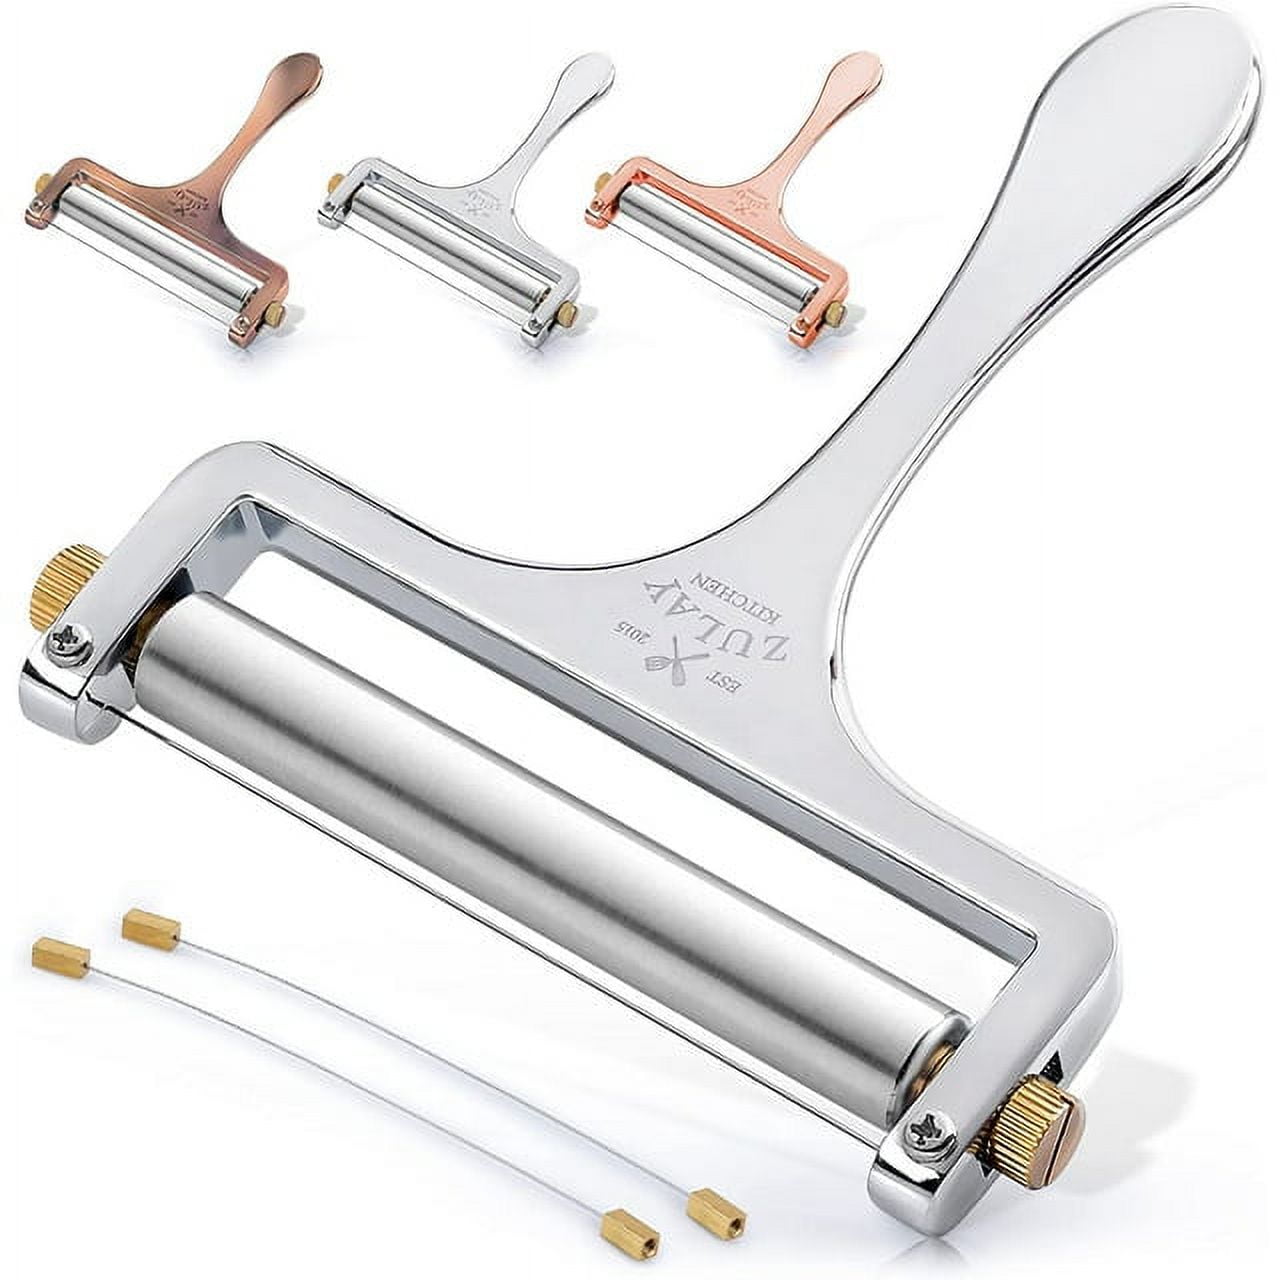 Cheese Cutter Slicing Tool Stainless Steel Cheese Slicer Multi